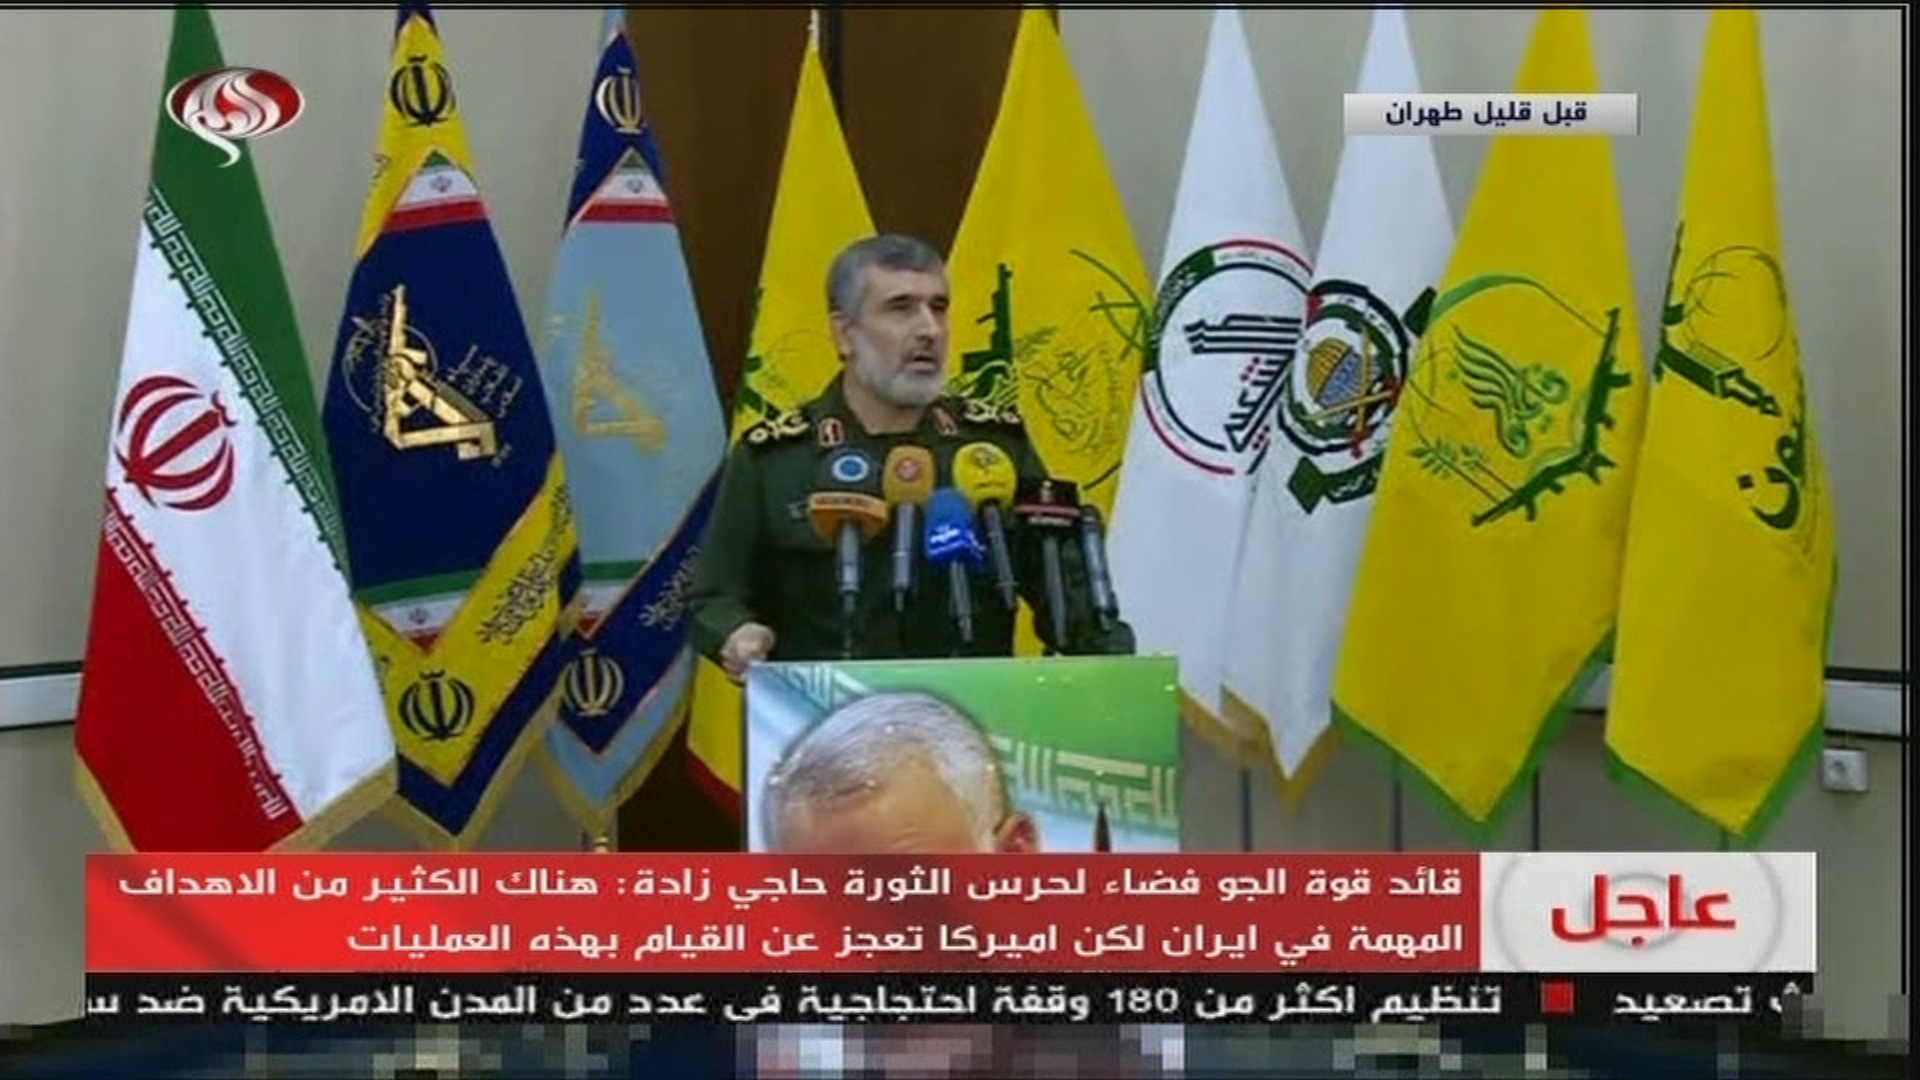 IRGC airforce commander Amir Ali Hajizadeh appears on state TV in front of proxy flags including the PMU militia flag, January 9. (Screengrab from Twitter)